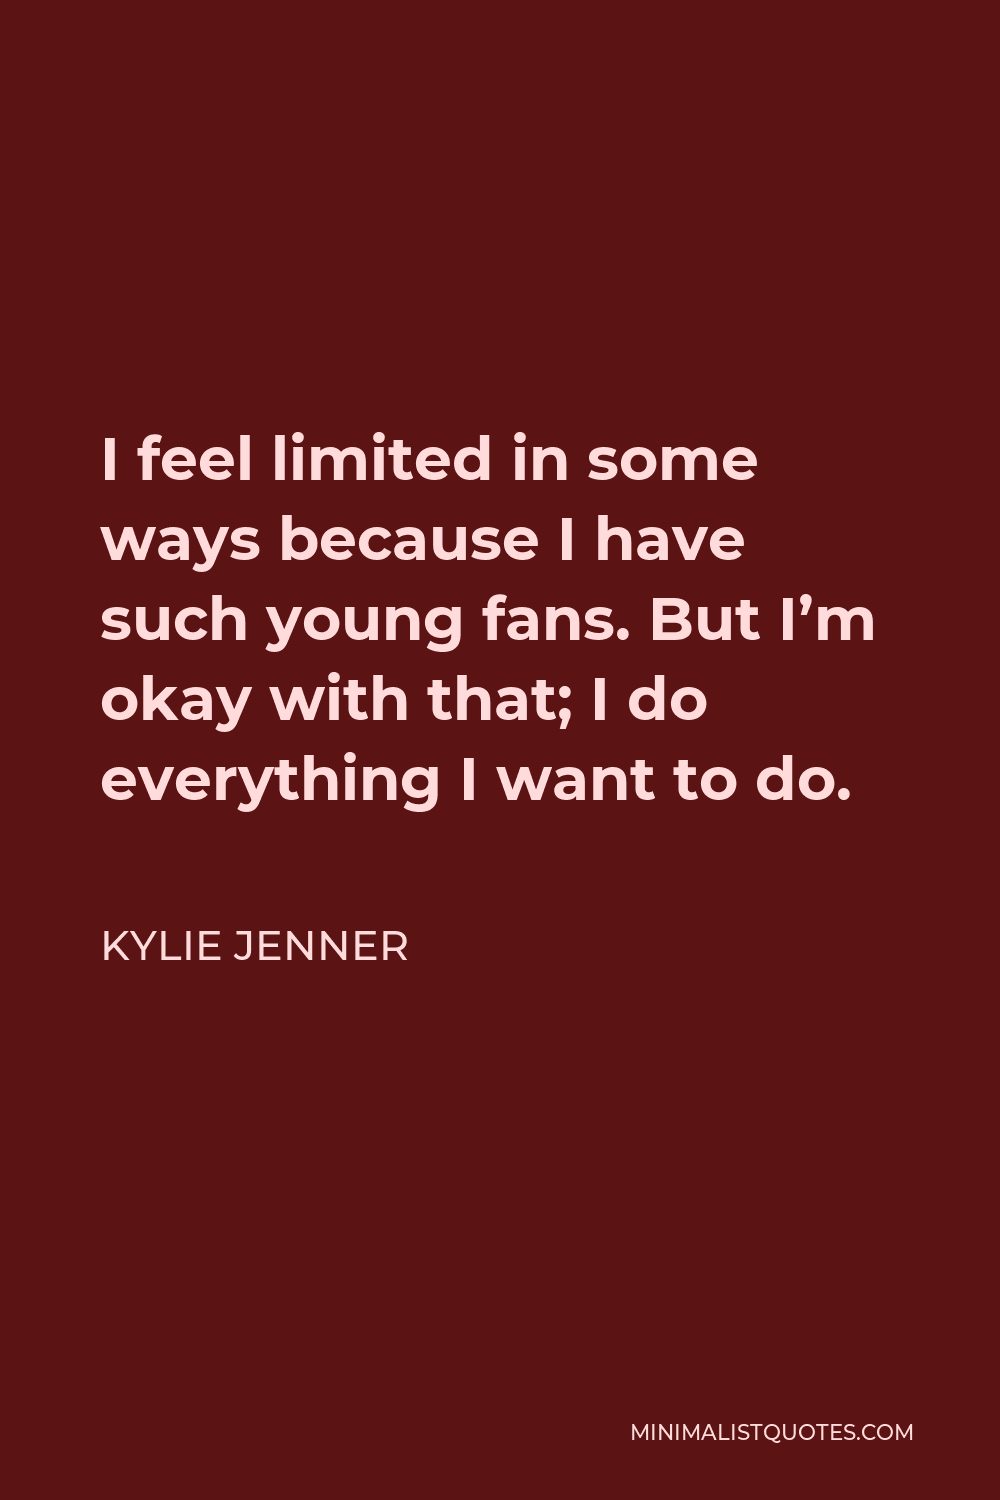 Kylie Jenner Quote - I feel limited in some ways because I have such young fans. But I’m okay with that; I do everything I want to do.